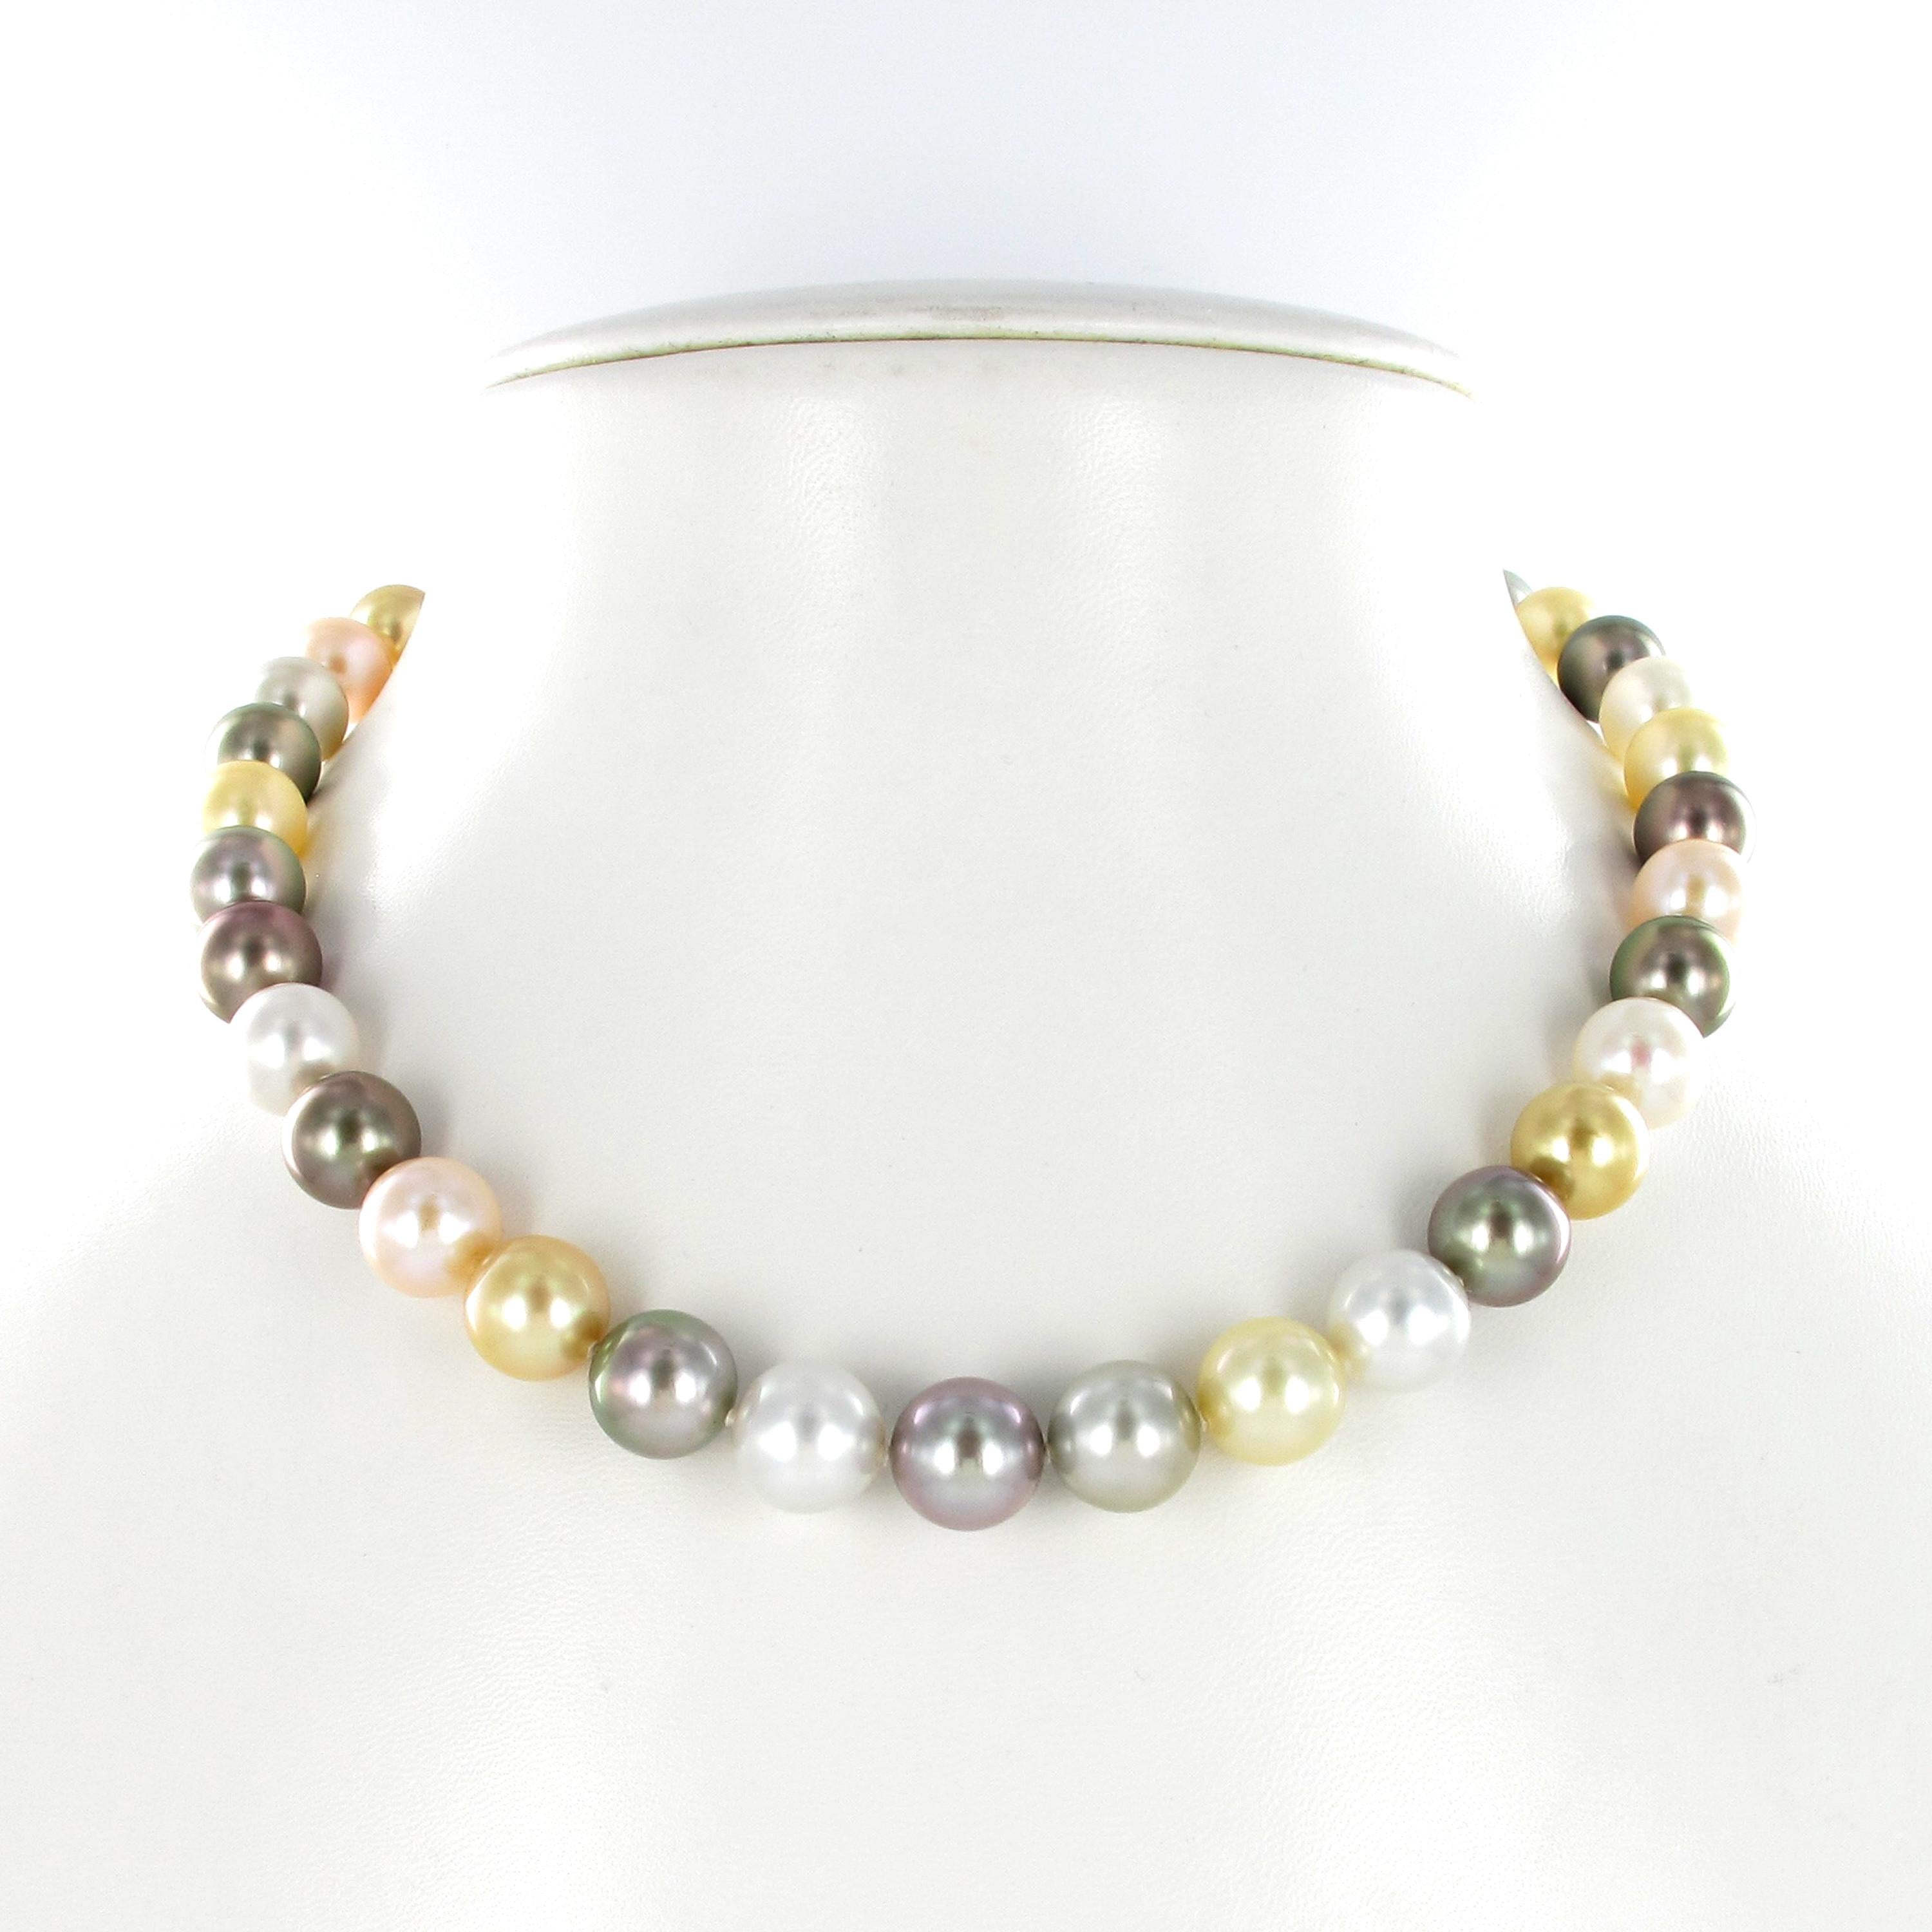 This colorful necklace features 39 round Tahitian, South Sea, and Freshwater cultured pearls graduating from 9.7 mm to 11.9 mm. With an elegantly hidden bayonet/tube clasp in 18 karat yellow gold.

The pearls are of perfectly round shapes, with a